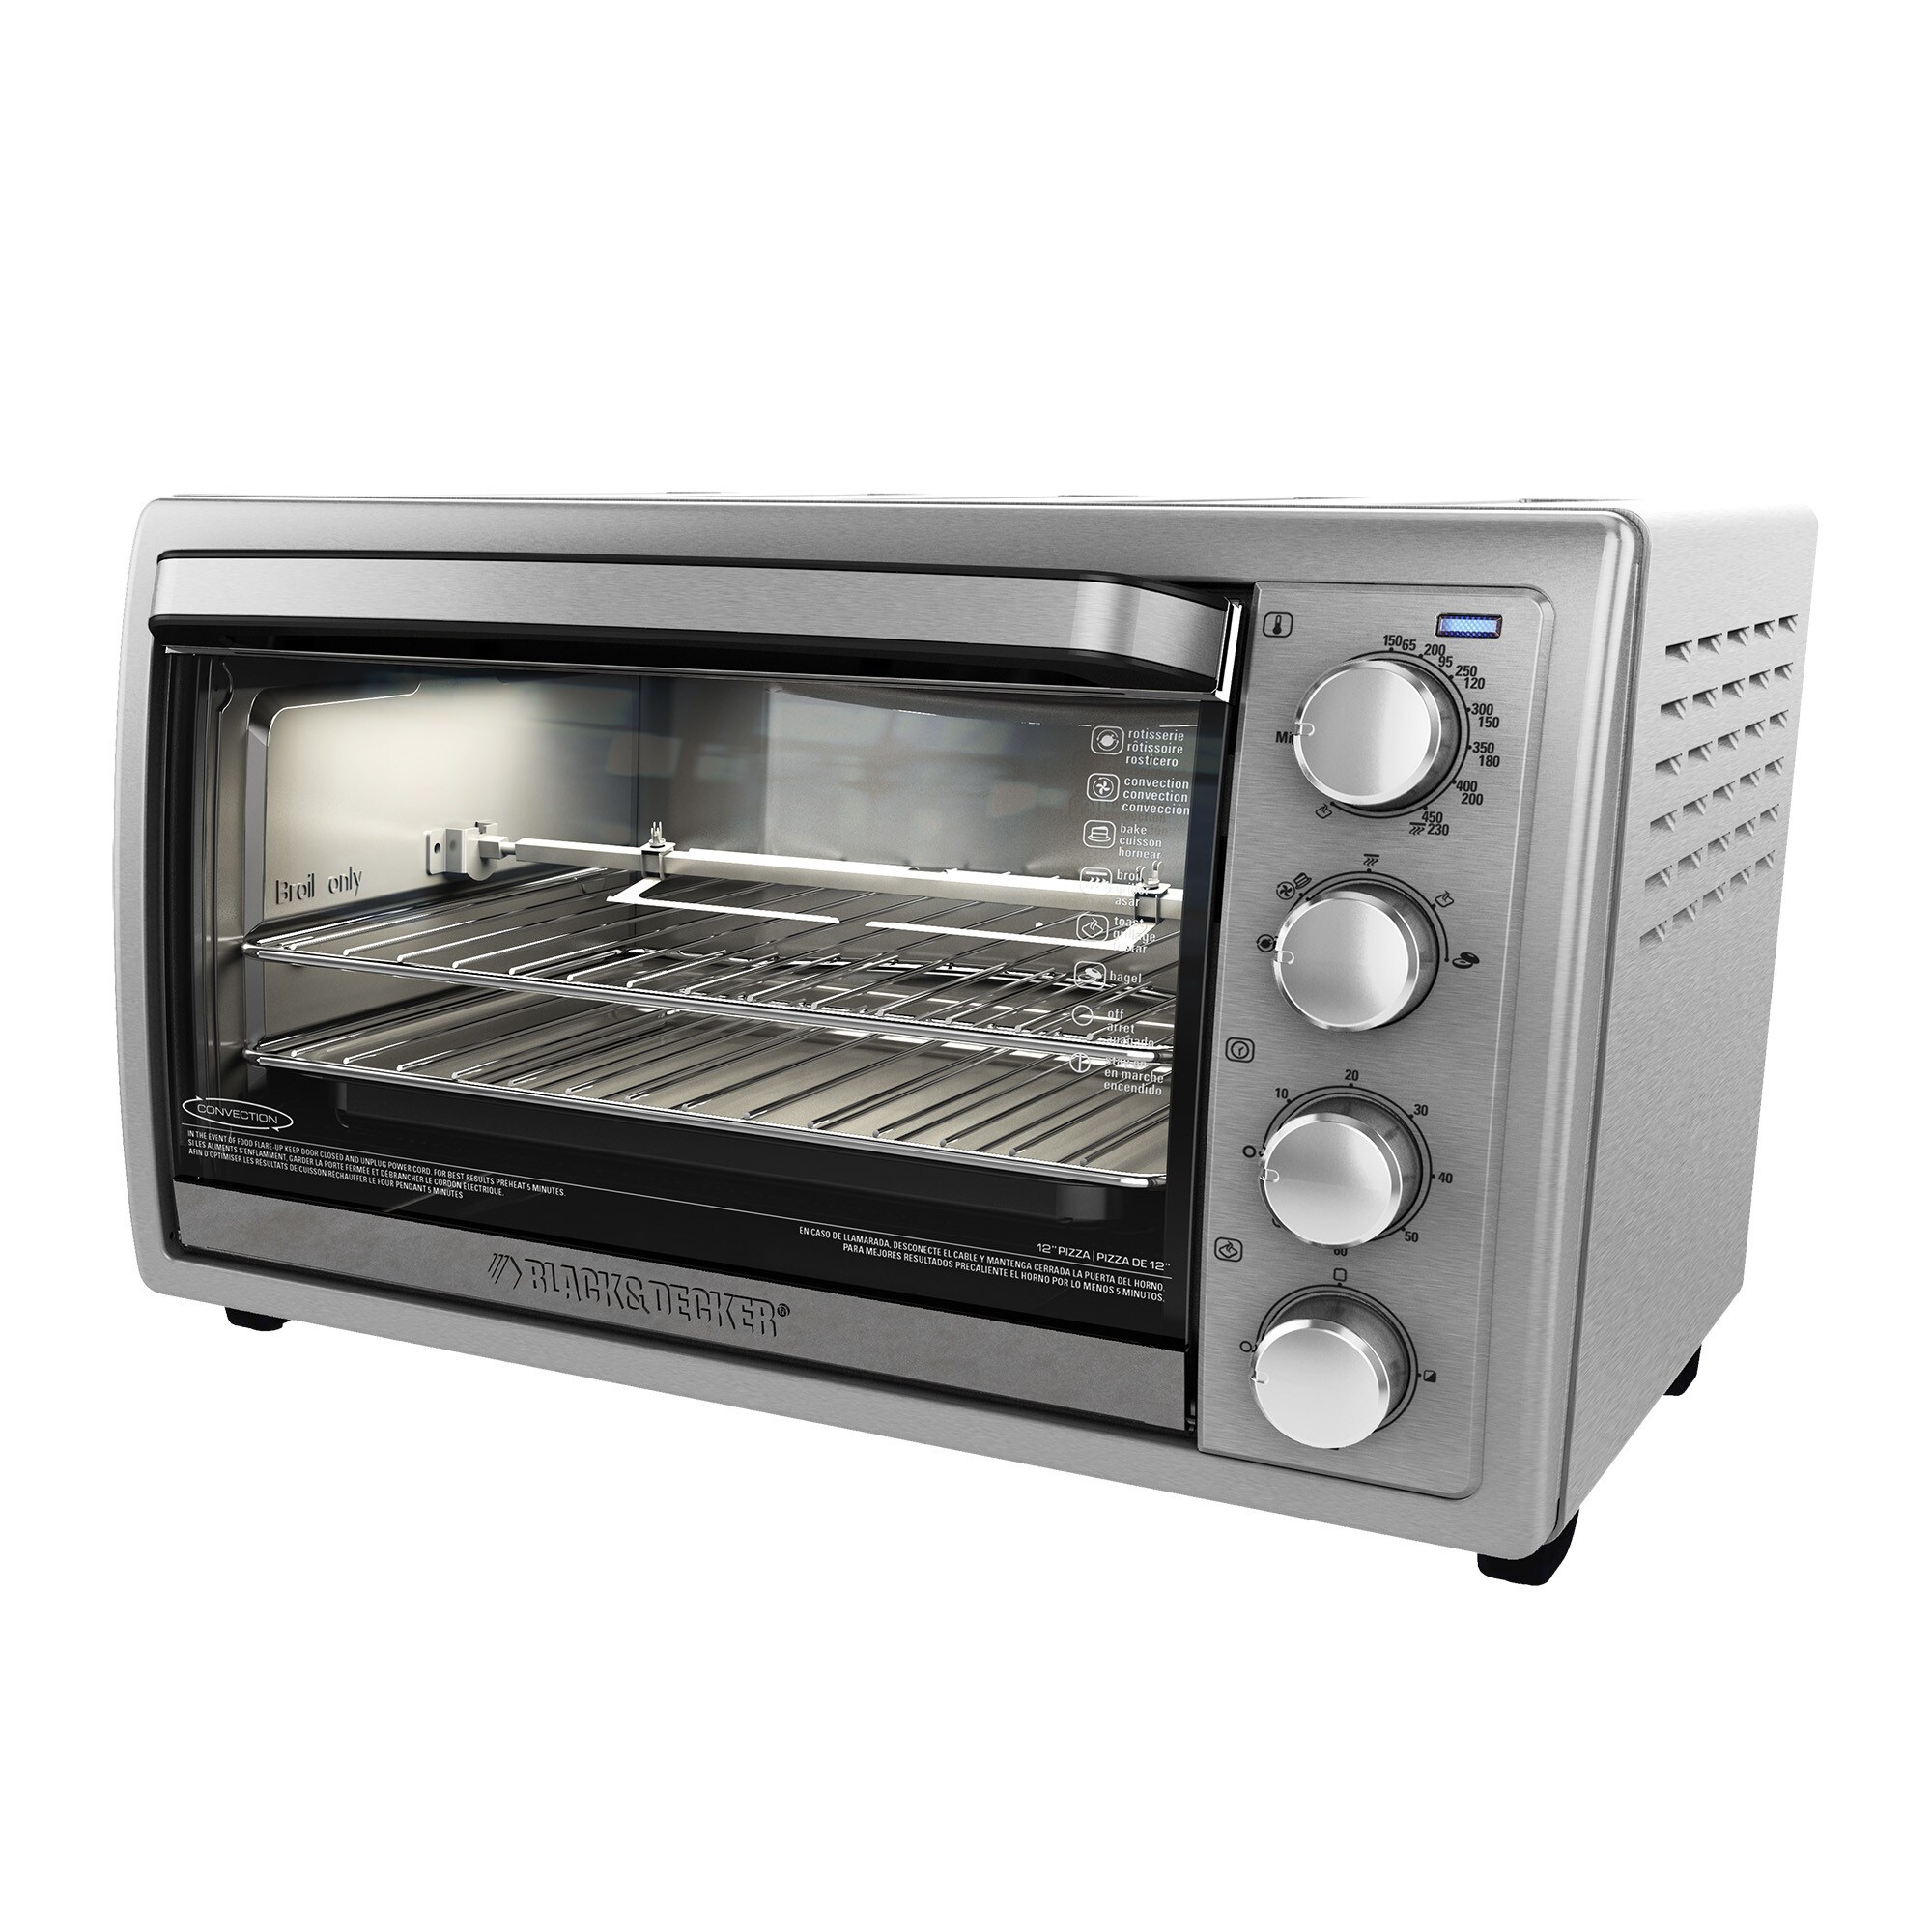 Stainless Steel Finish Fast Ship Brand New 6-Slice Counter top Toaster Oven 